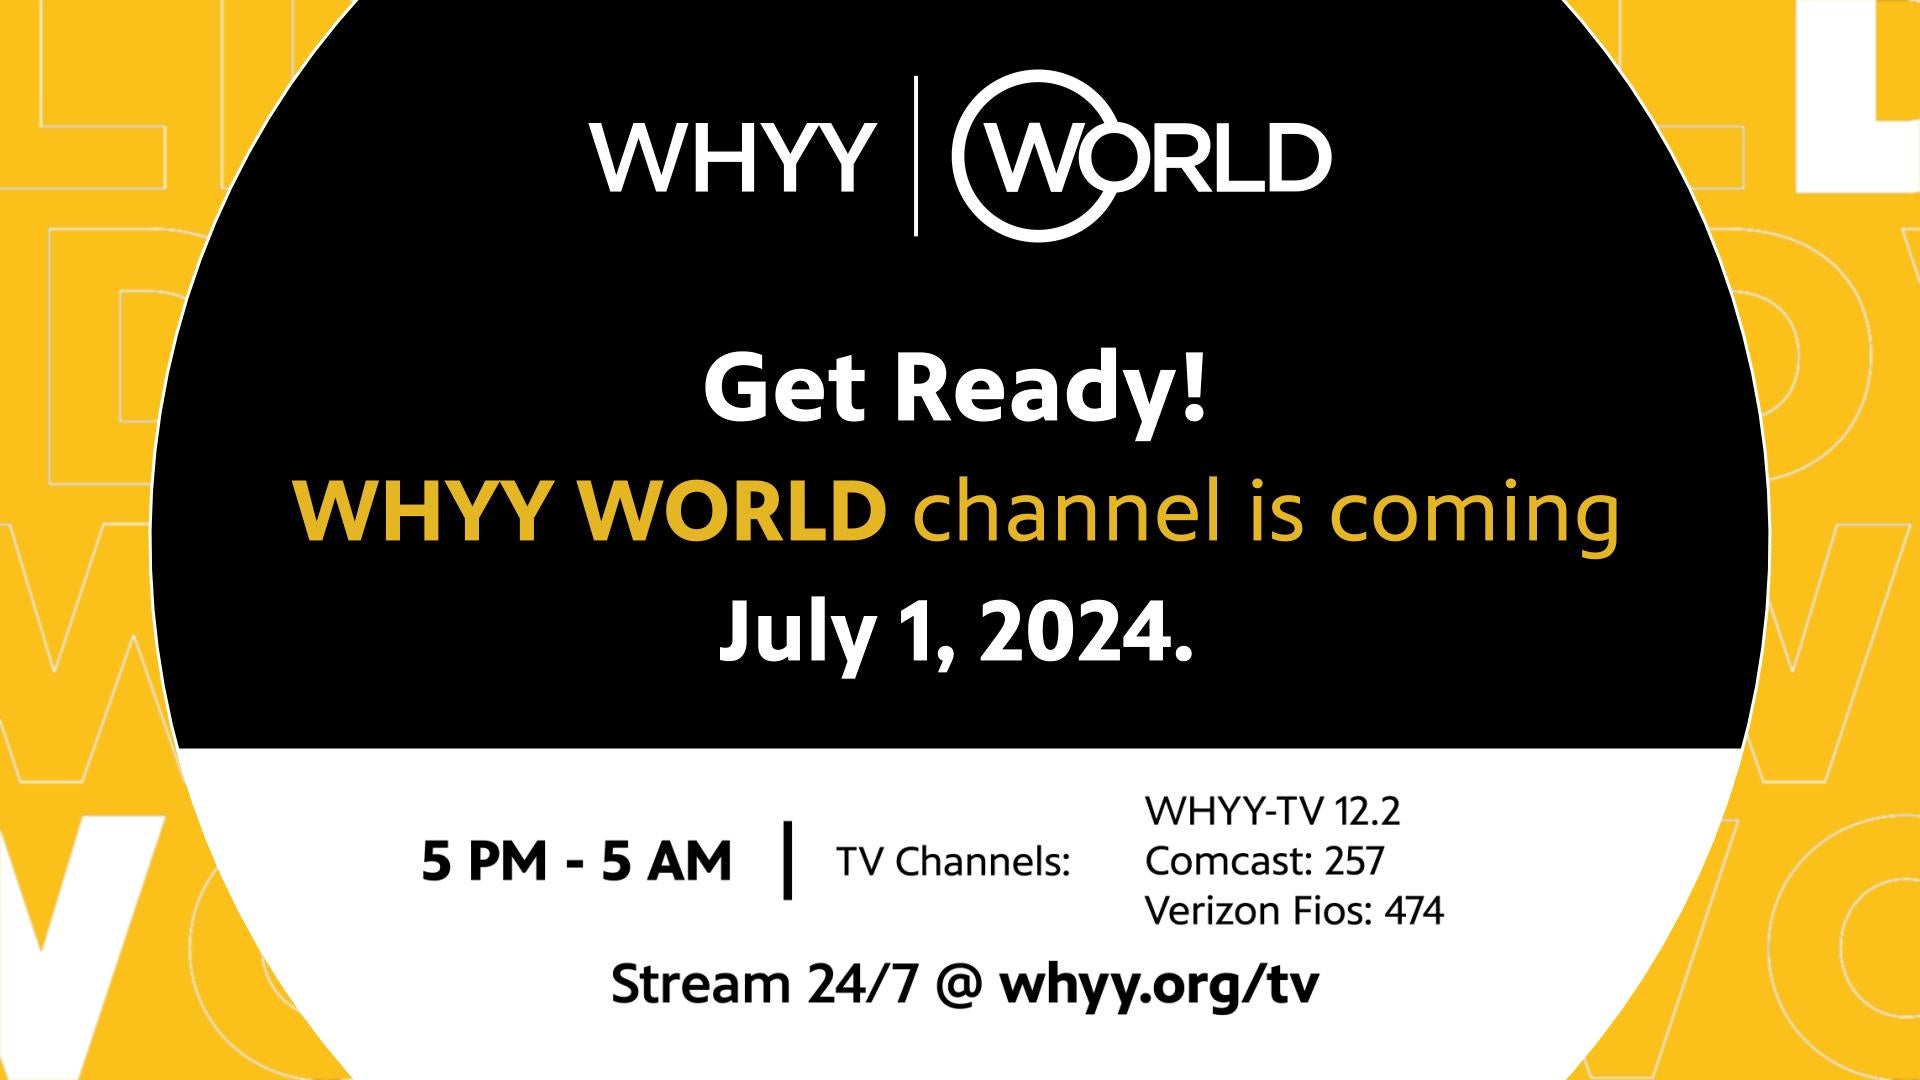 WORLD CHANNEL to be Launched by WHYY on July 1